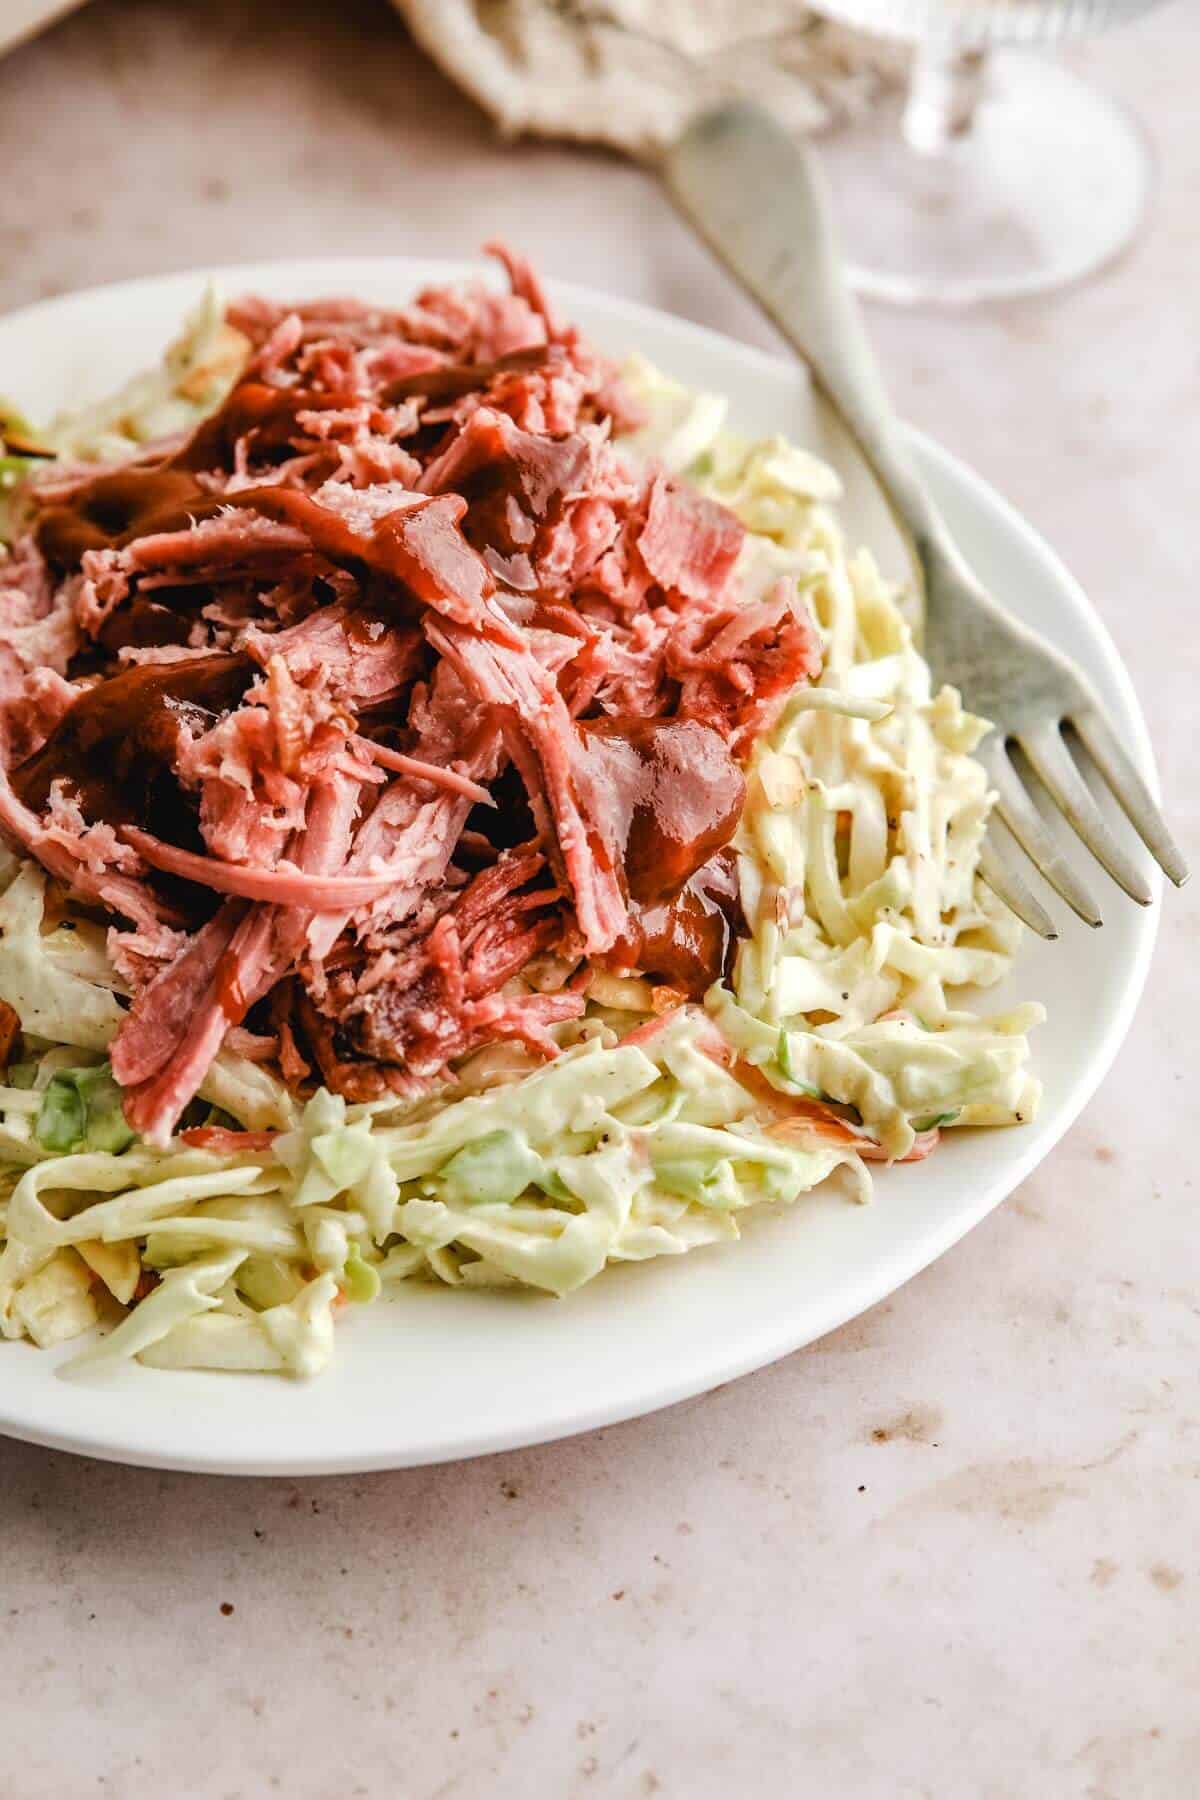 curry coleslaw on a plate with shredded pork and BBQ sauce over the top. 